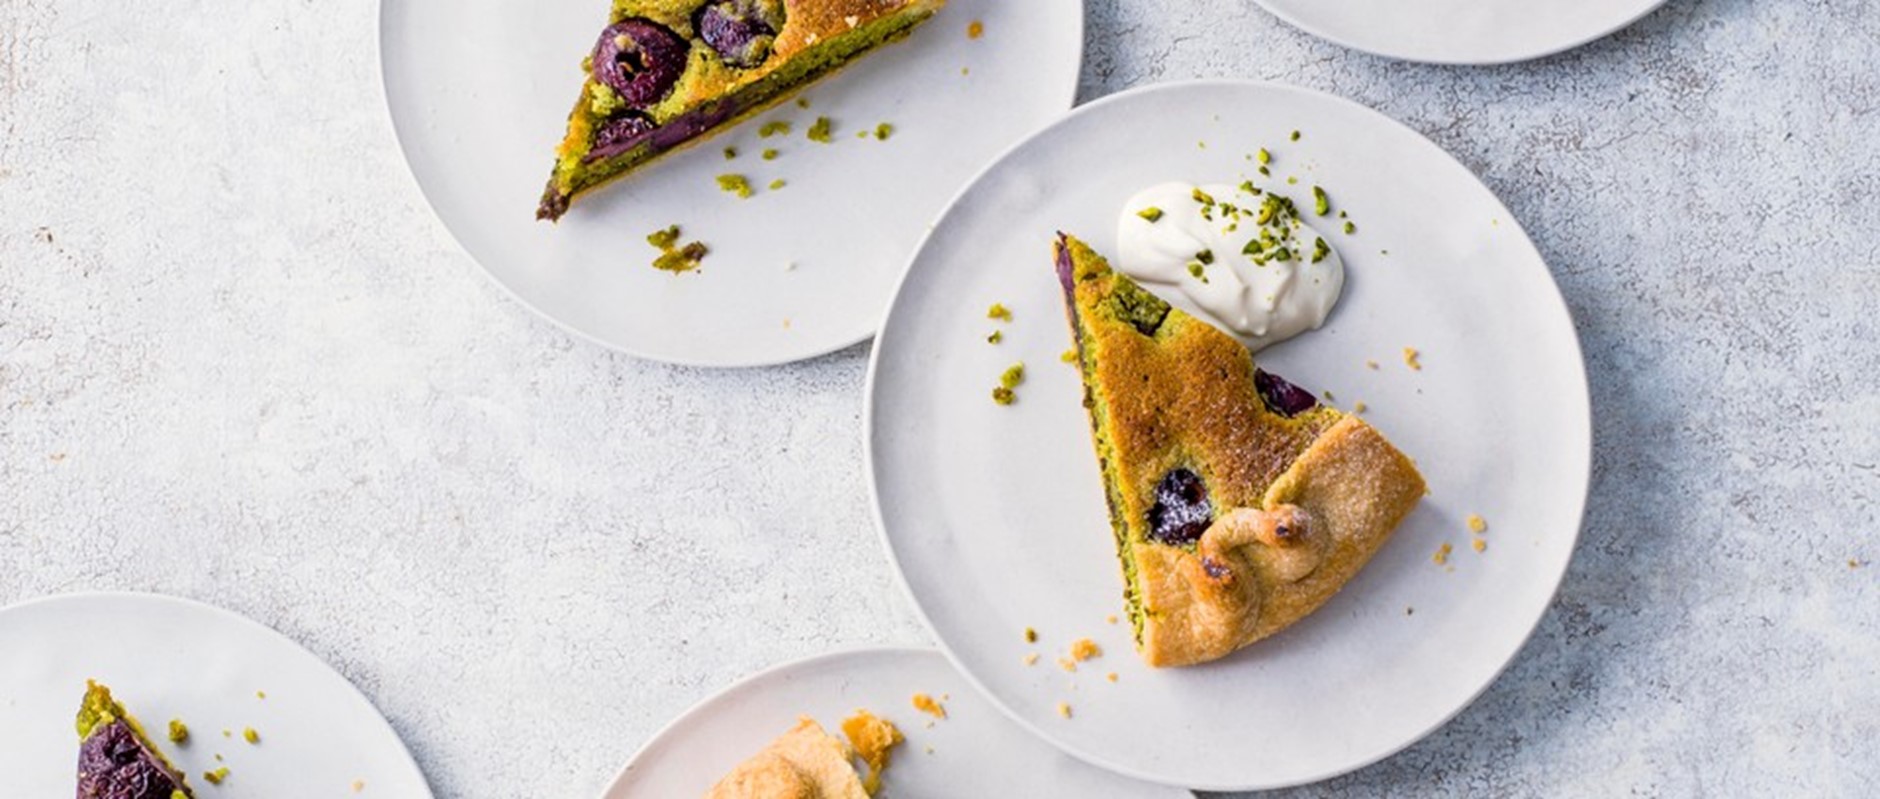 Cherry and pistachio bakewell galette